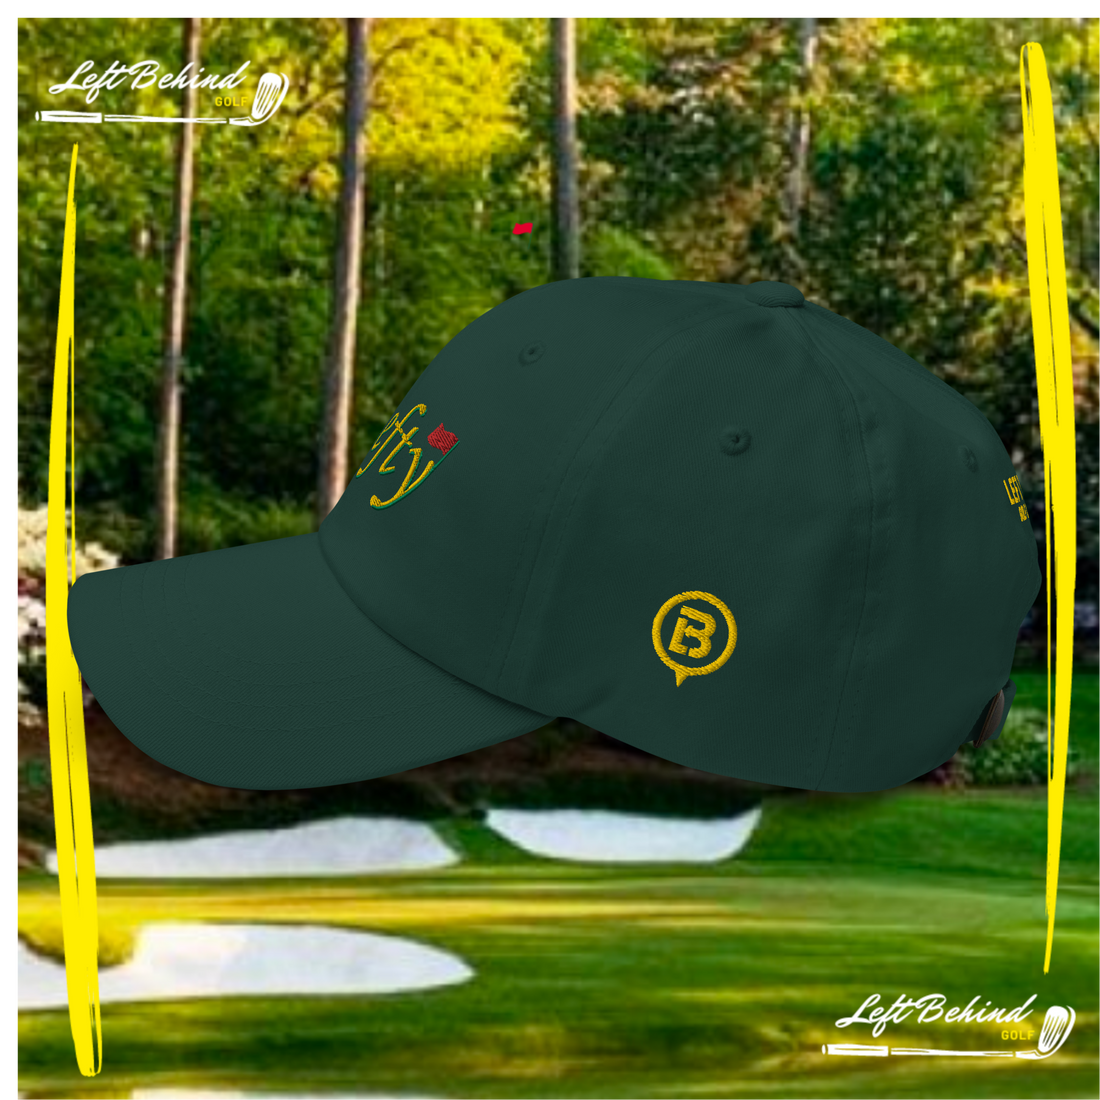 Hats  Augusta Edition Lefty Dad hat  Lefty Dad hat Augusta Edition  Augusta Edition hat for left-handed  Left-handed Augusta Edition cap  Dad hat with Augusta Edition design  Left-handed Augusta cap  Augusta Lefty Dad cap  Lefty hat with Augusta print  Augusta Edition baseball cap for lefties  Lefty Augusta Edition headwear  Dad cap designed for left-handed